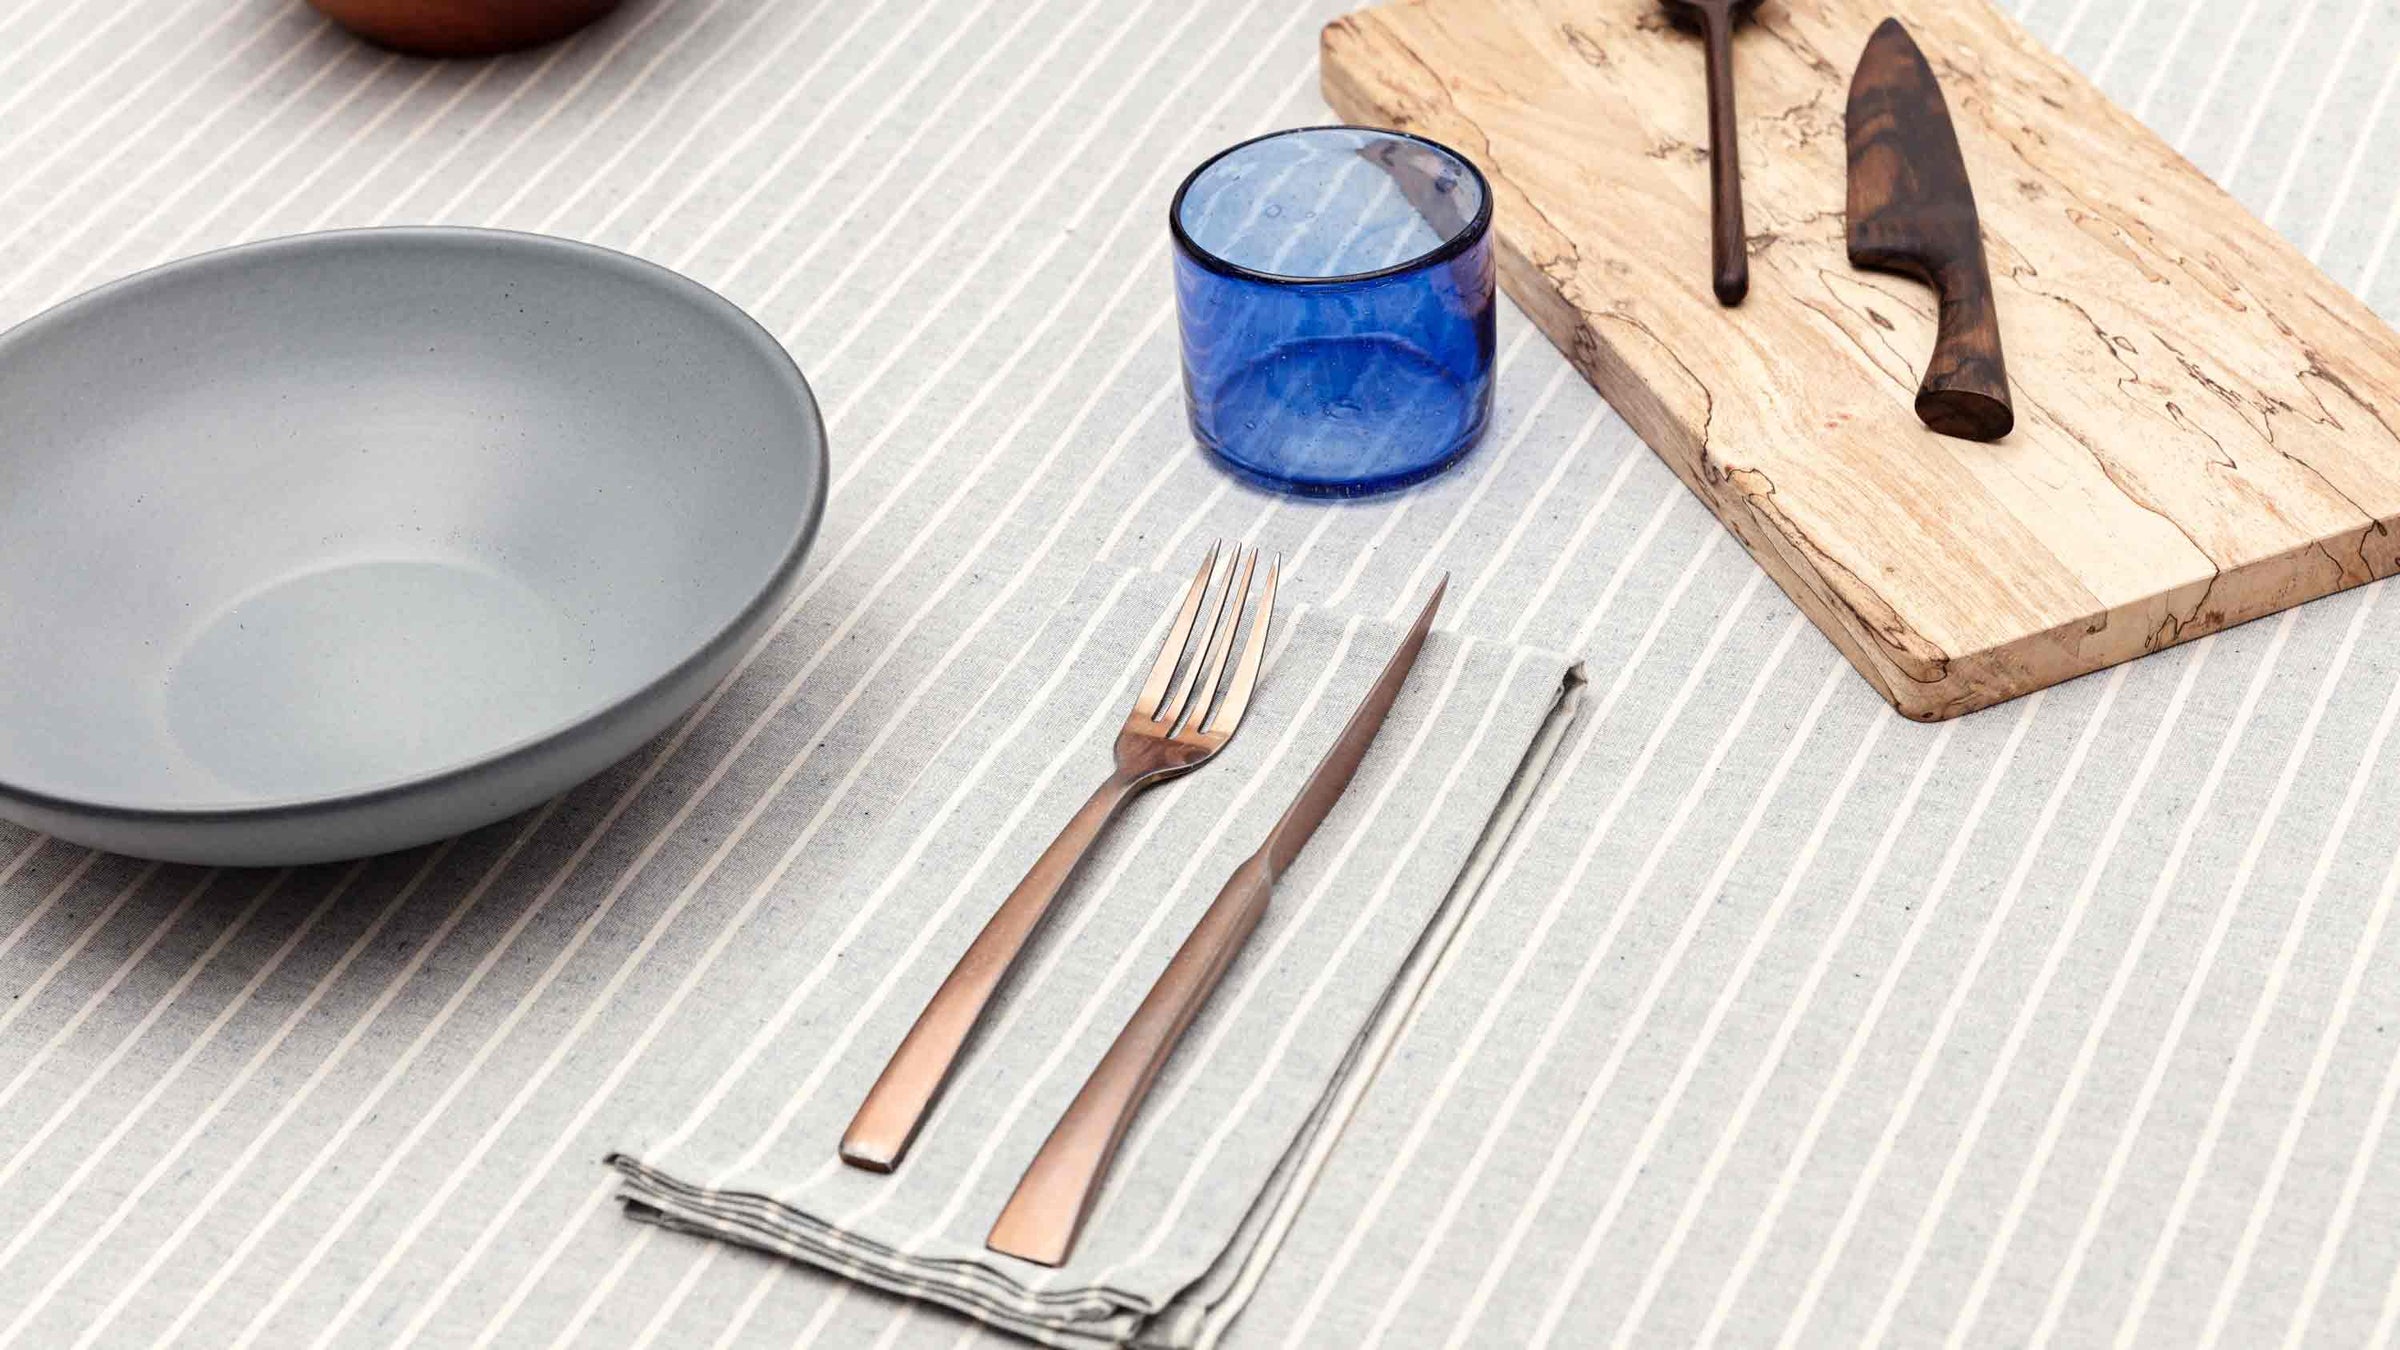 A striped tablecloth. On top is a grey ceramic bowl, a blue glass, a wooden cutting board with a dark wooden knife and spoon on top. A copper fork and knife on top of a striped napkin